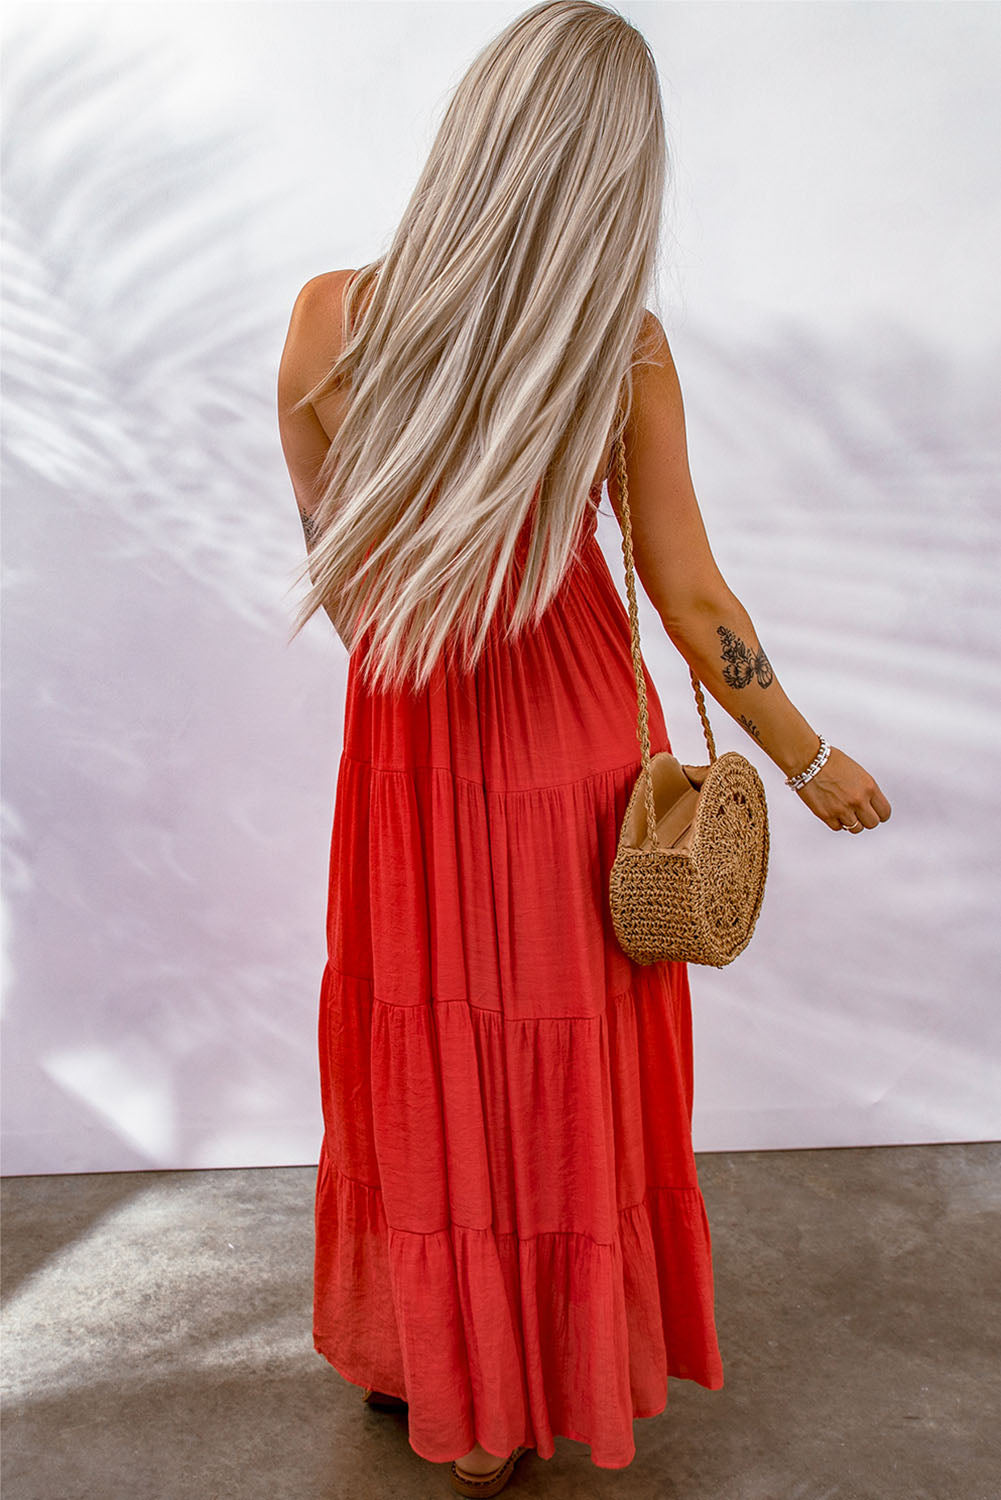 Fiery Red O-ring Smocked Back Spaghetti Straps Tiered Maxi Dress